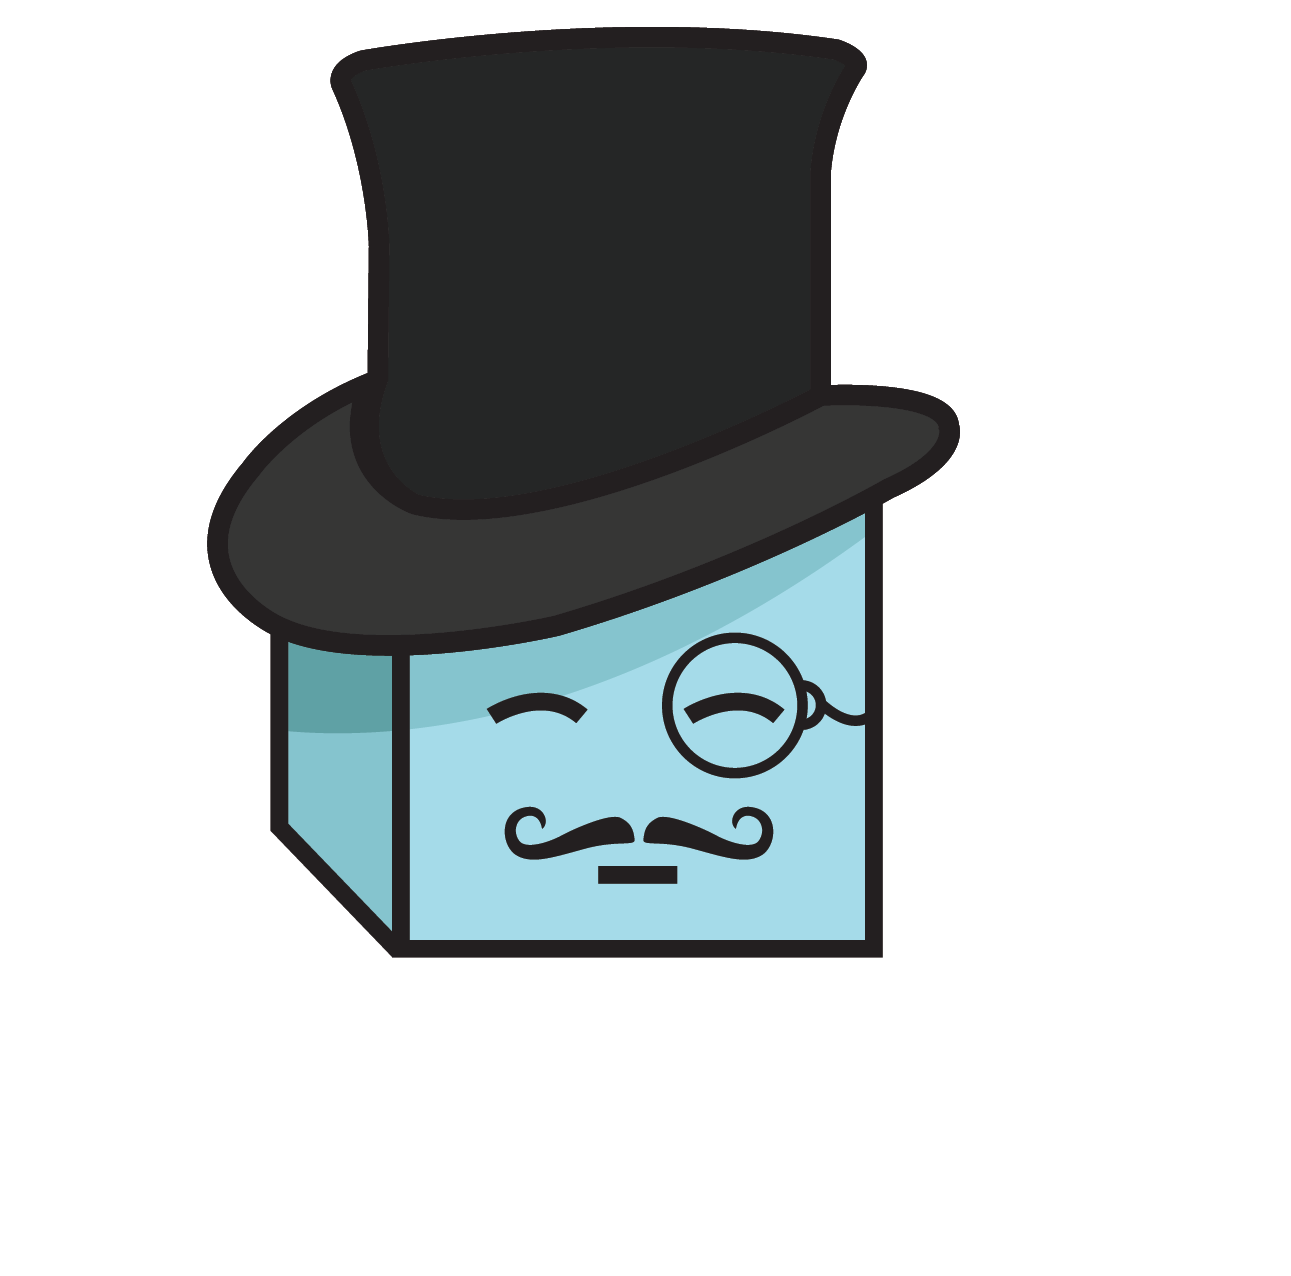 Products - Contact - Mr Ice Guy (1800x1800)